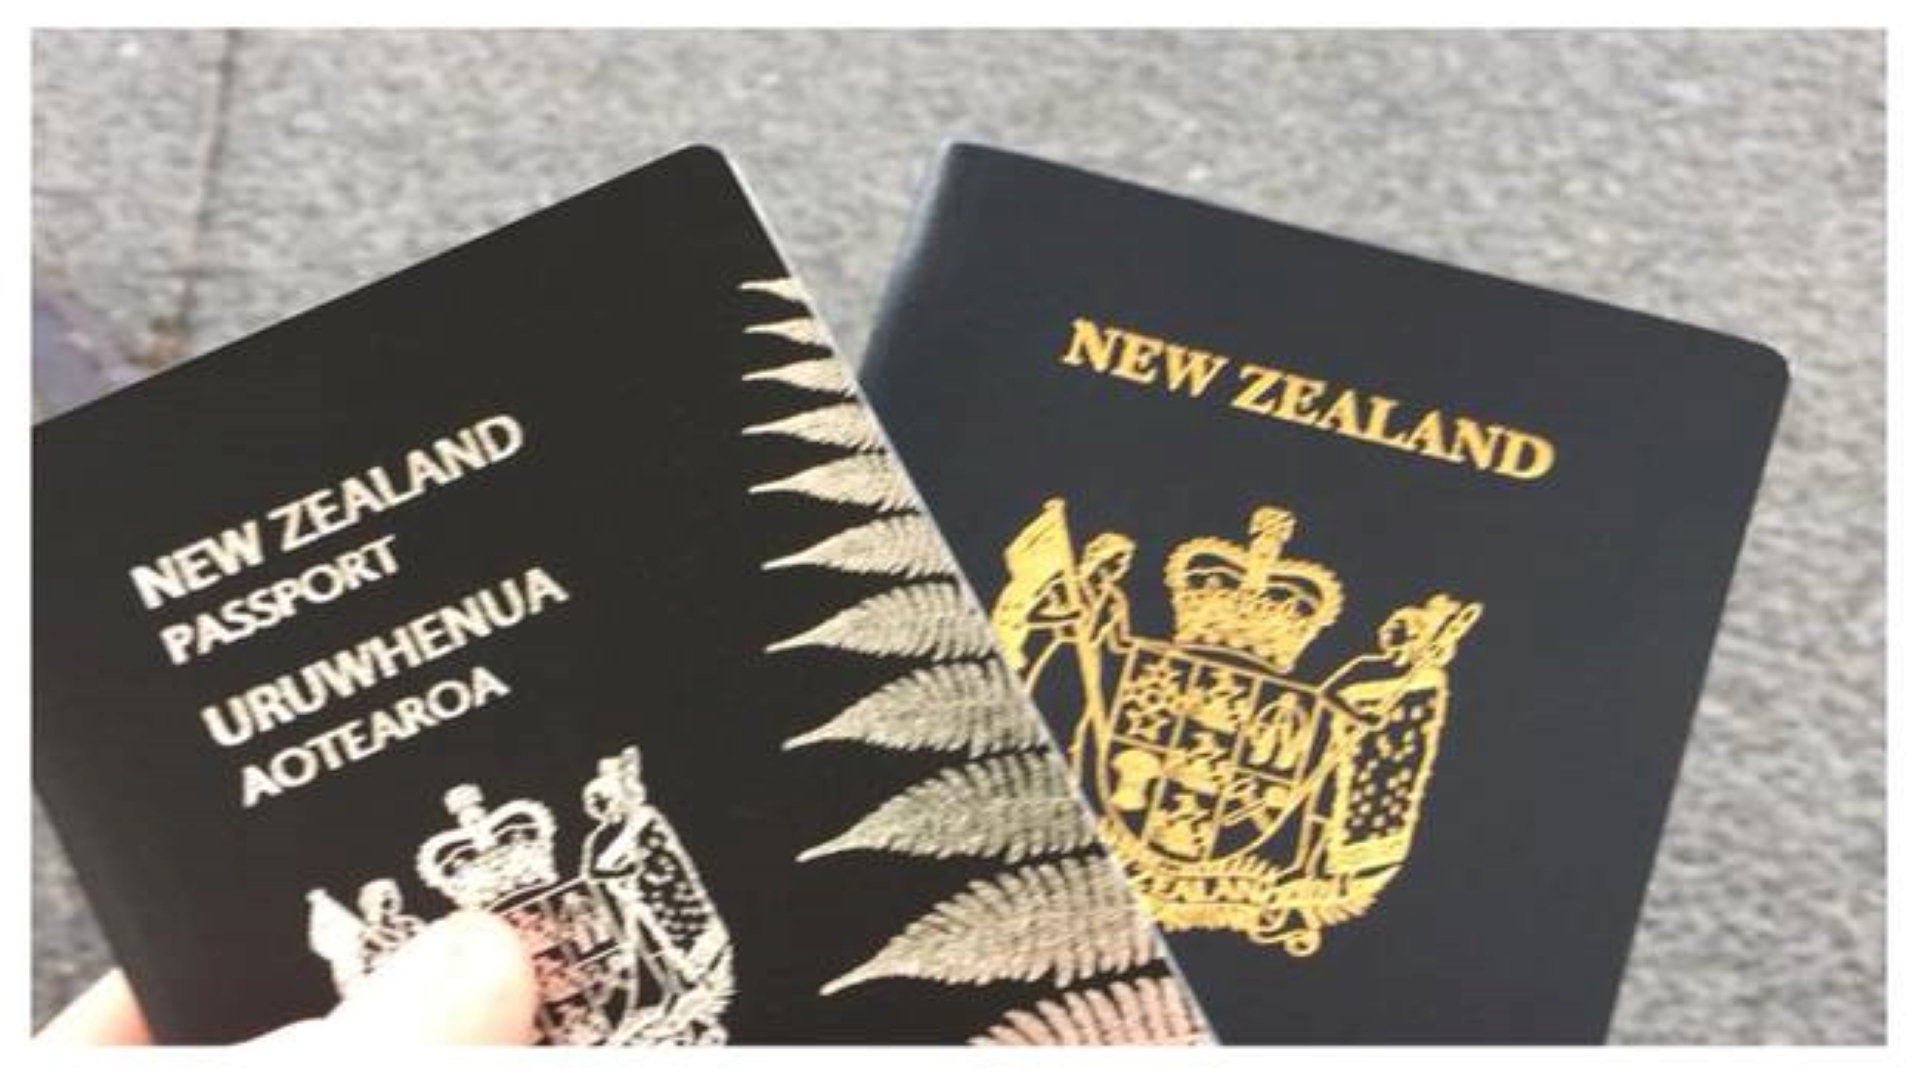 NEW ZEALAND VISA FOR MEXICAN CITIZENS